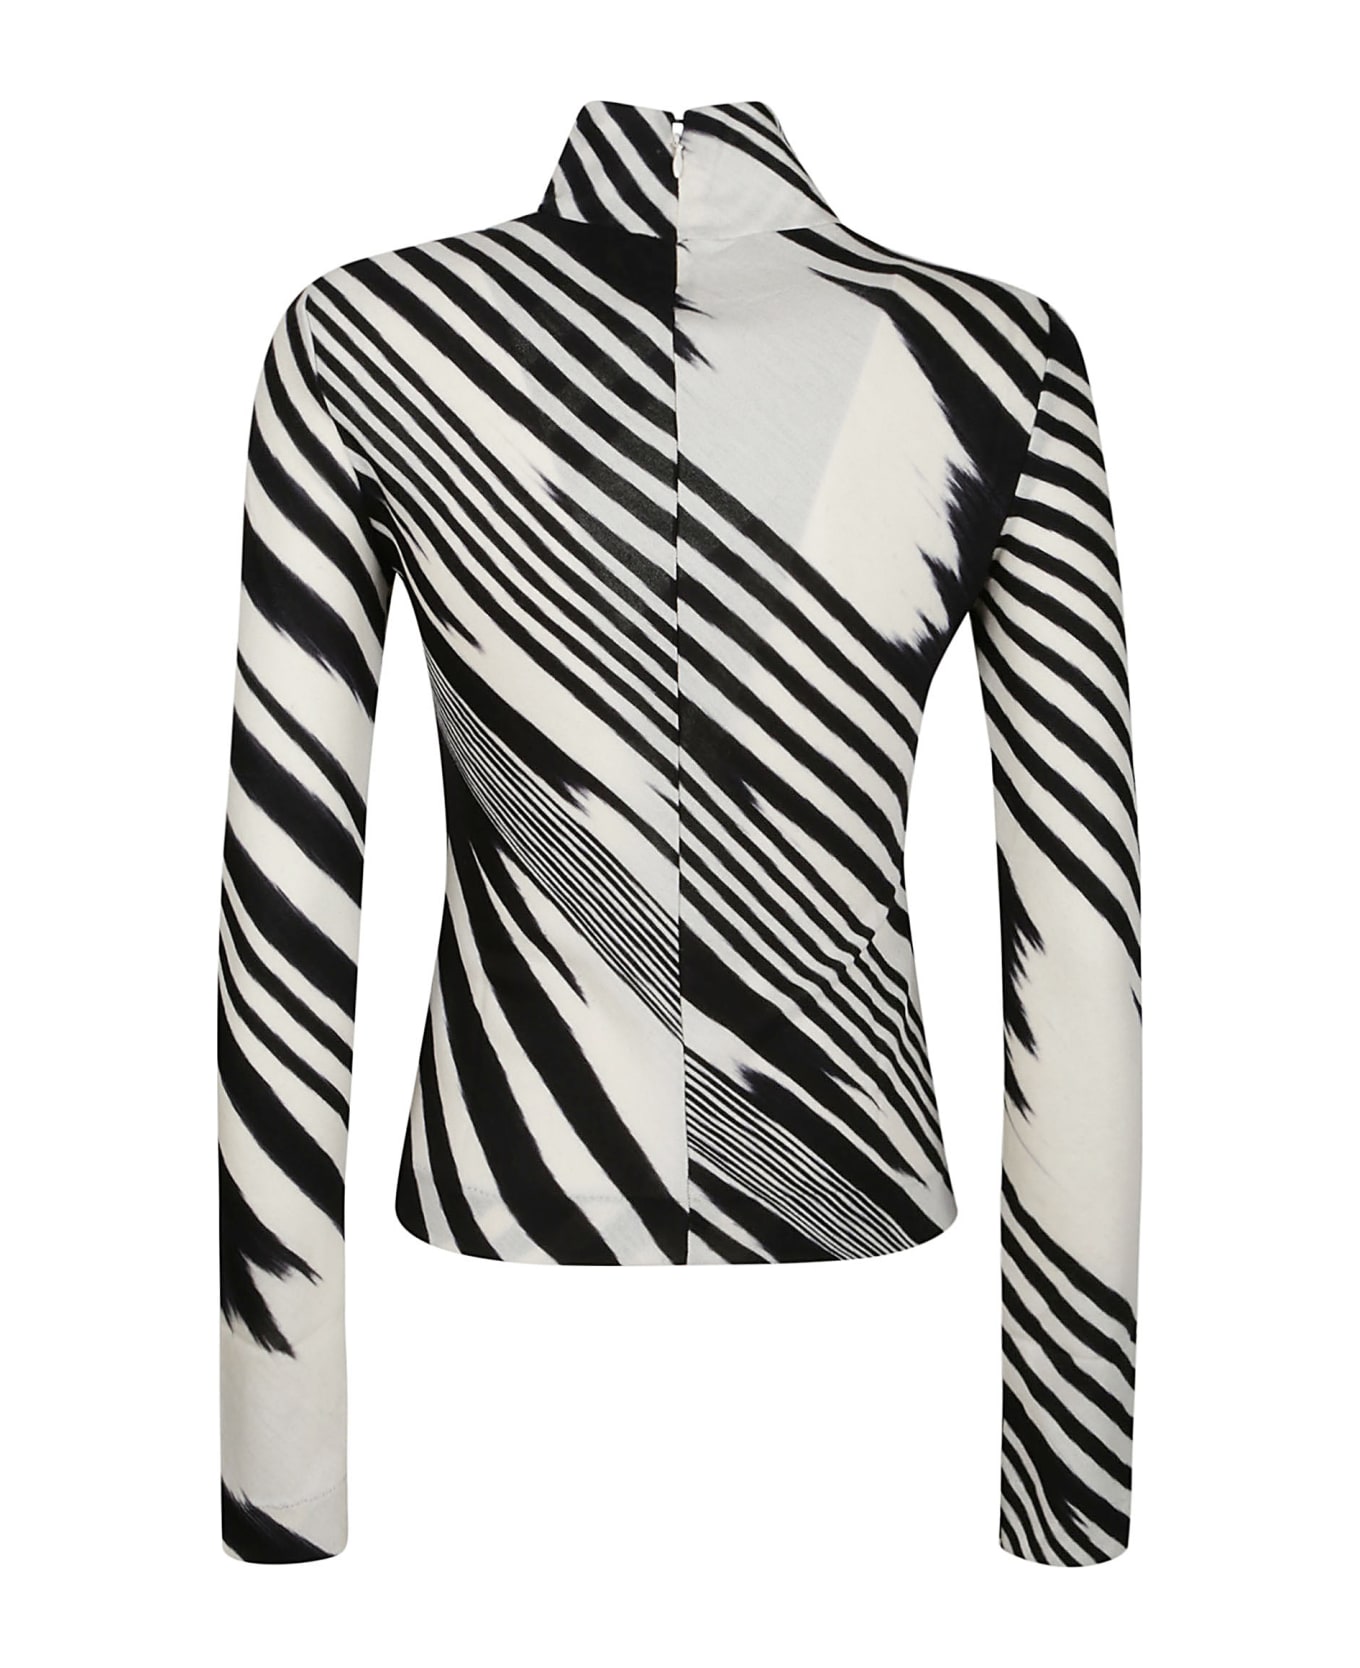 Missoni Turtle Neck Sweater - Black/white Space Dyed